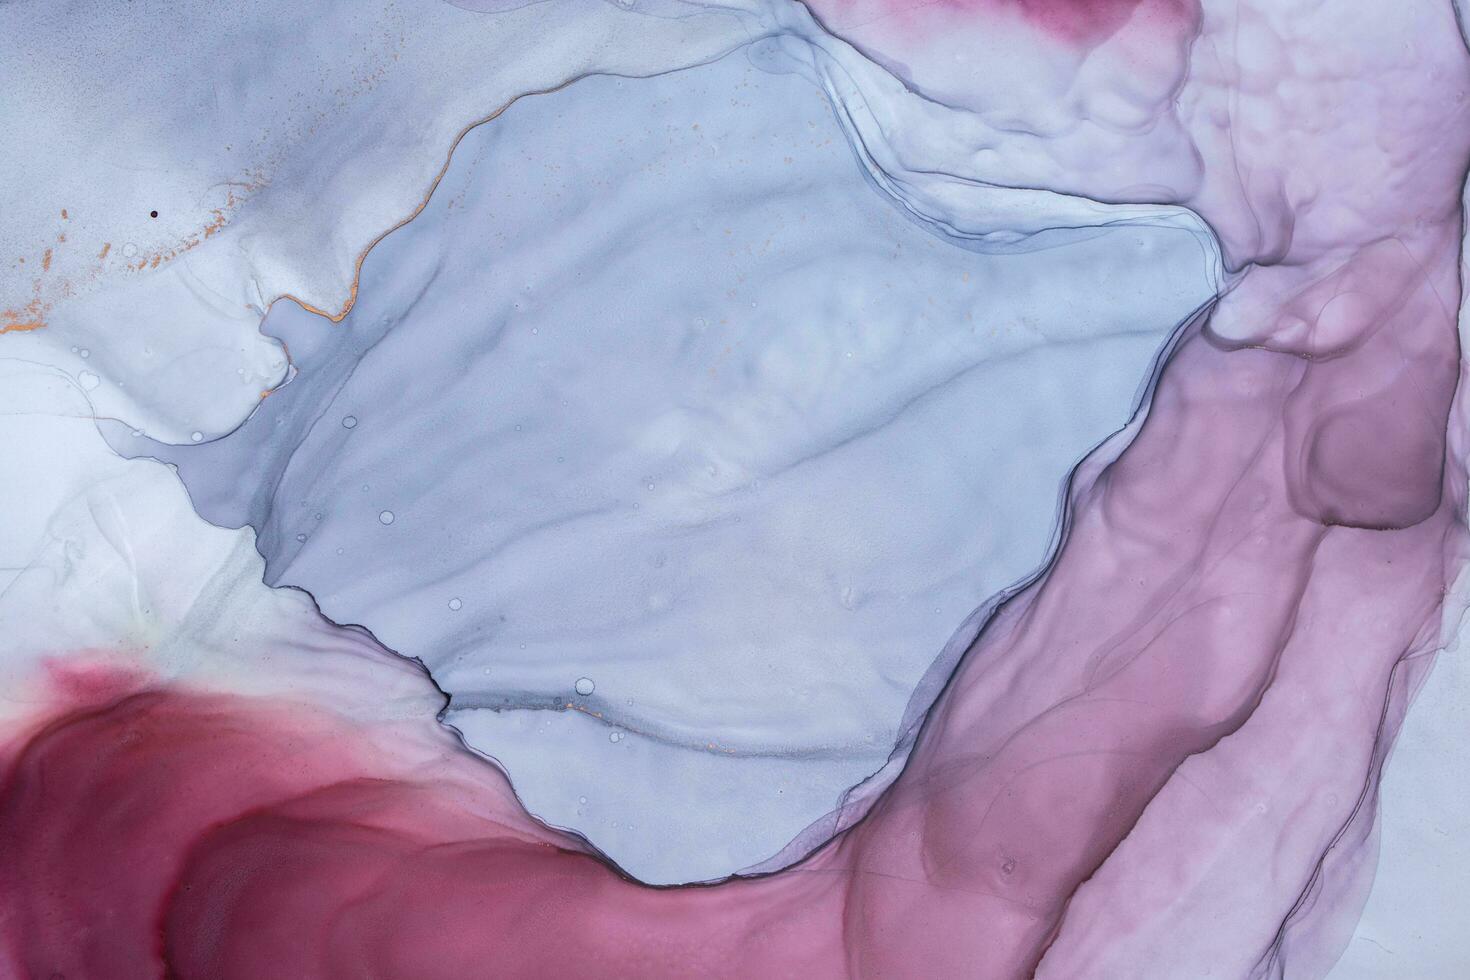 Alcohol ink sea texture. Contemporary art. Abstract art background. Multicolored bright texture. Fragment of artwork. Modern art. Inspired by the sky, as well as steam and smoke. Trendy wallpaper. photo